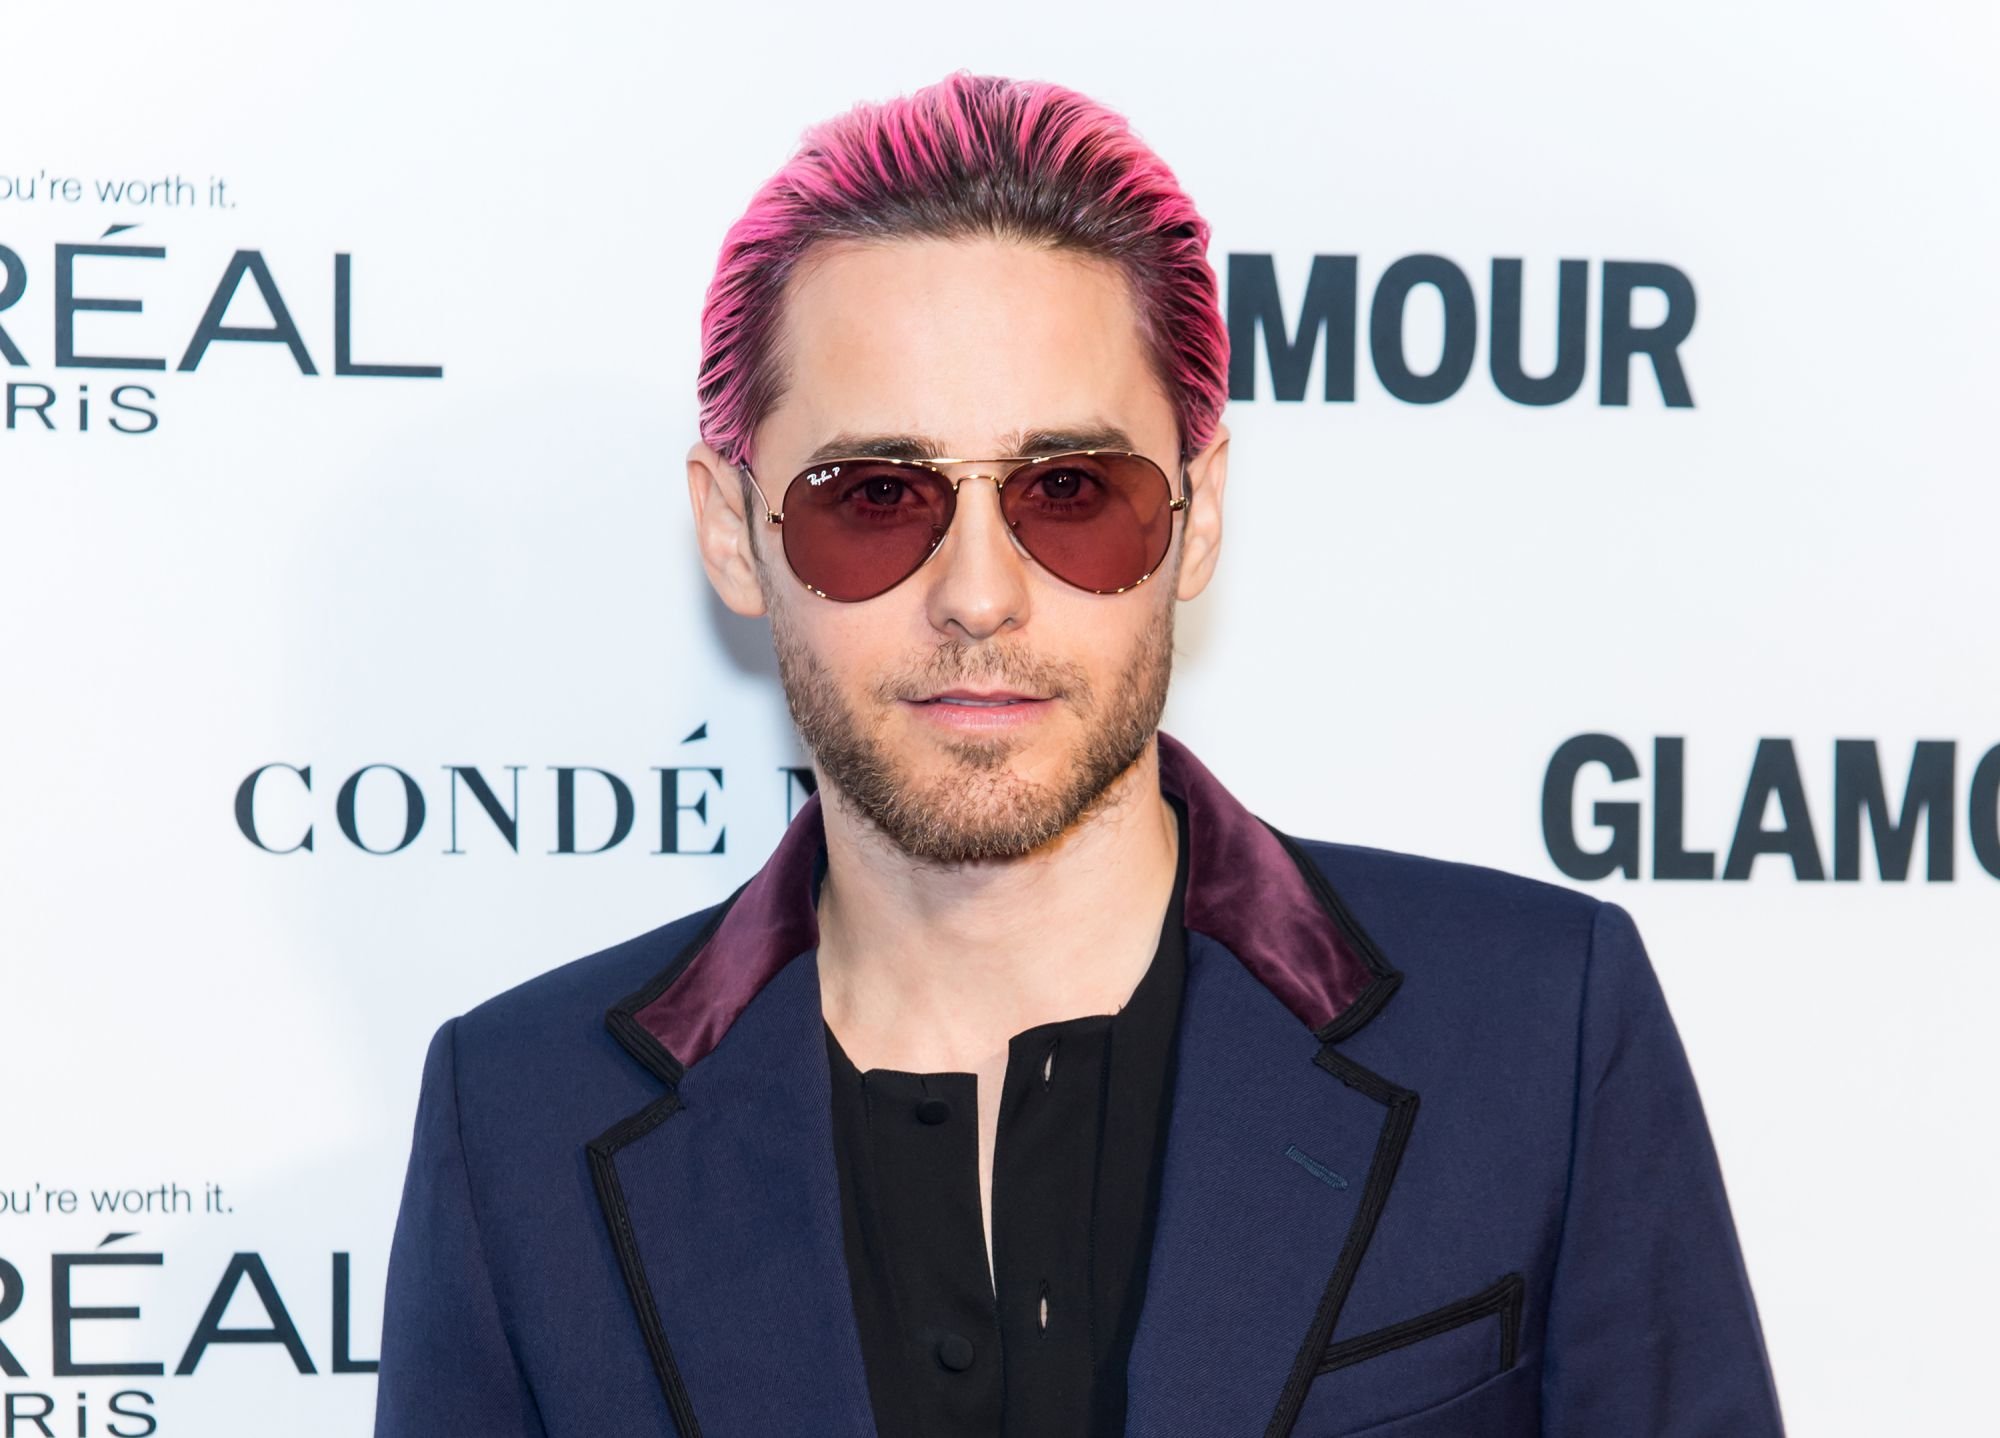 Jared Leto sur le tapis rouge des Glamour's 25th Anniversary Women Of The Year Awards à New York en novembre 2015.
